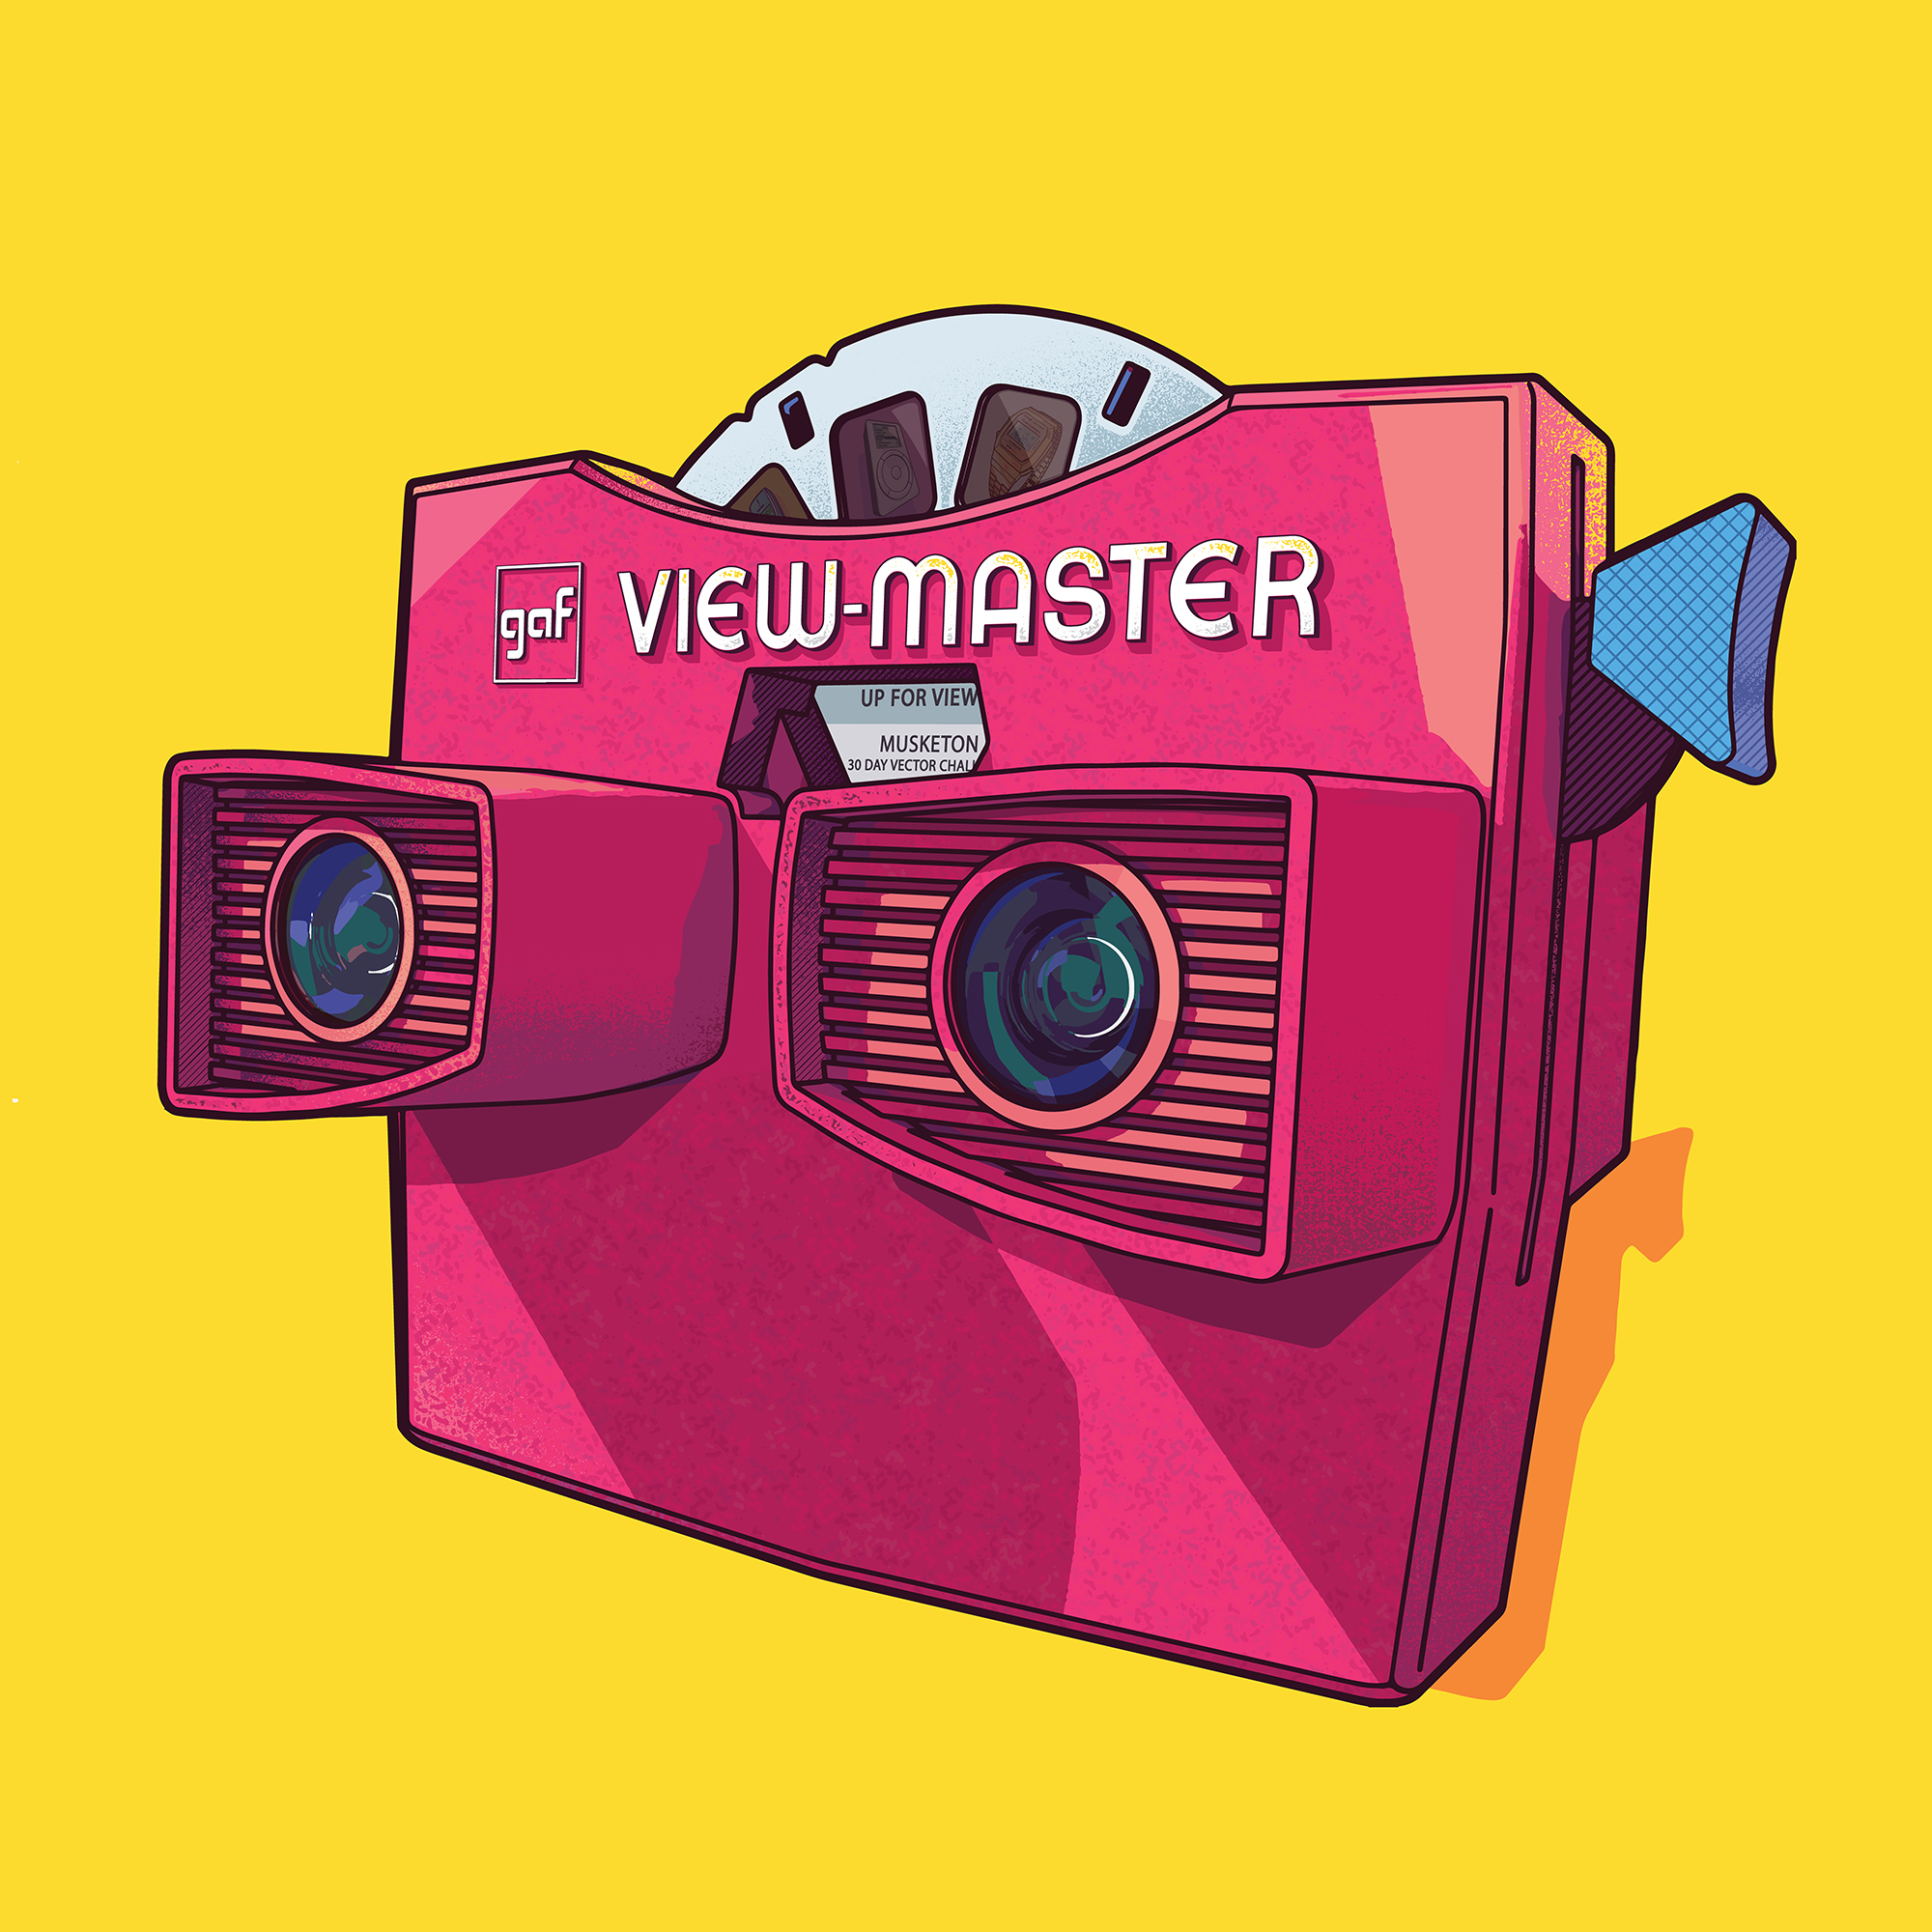 Viewmaster-done.jpg